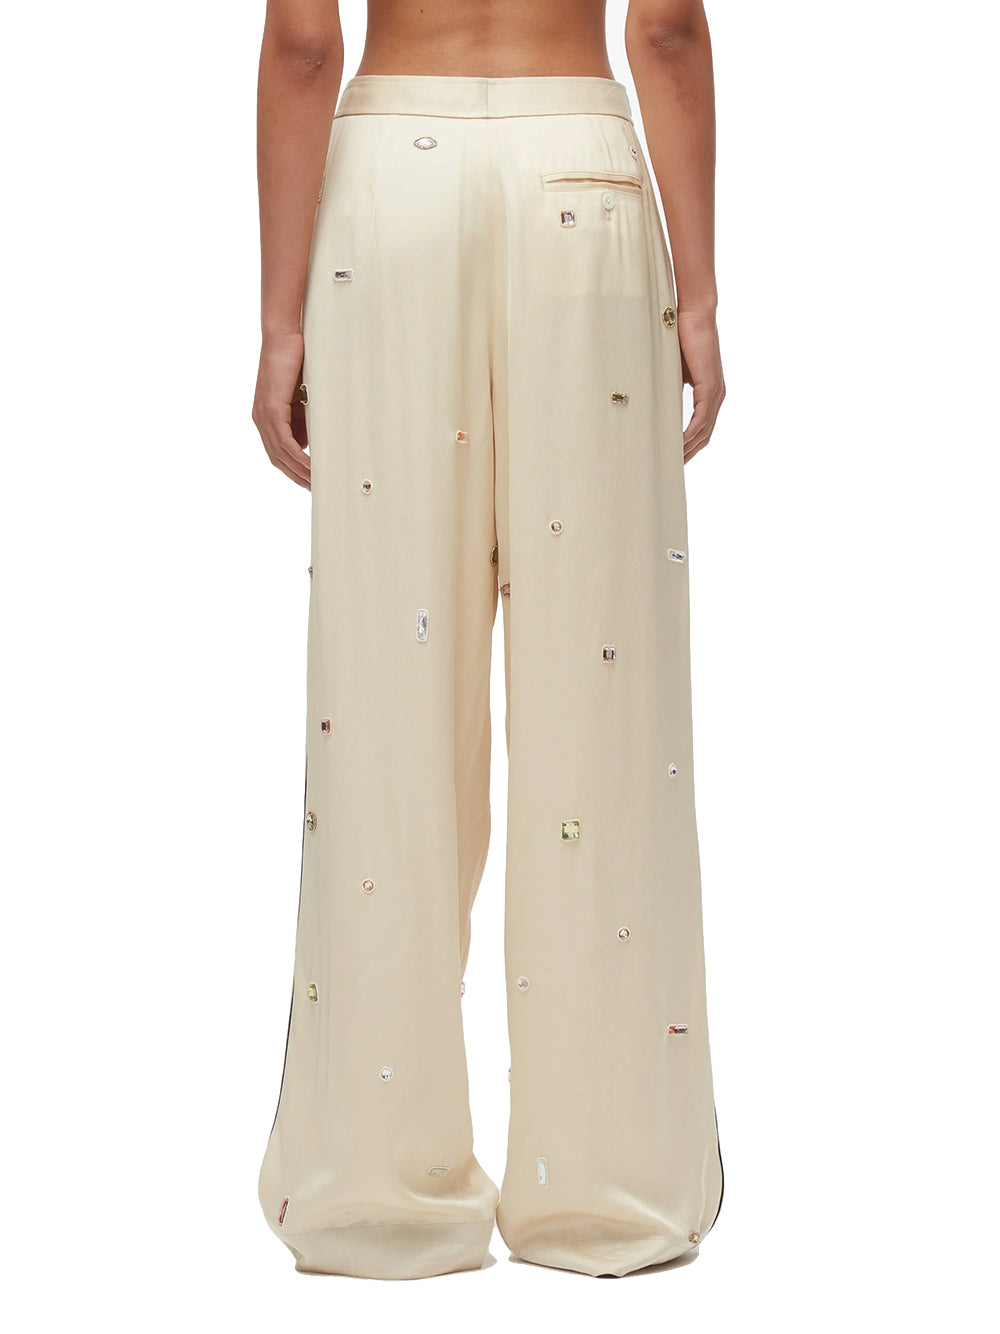 Halo Embroidered PJ Pants (Champagne)